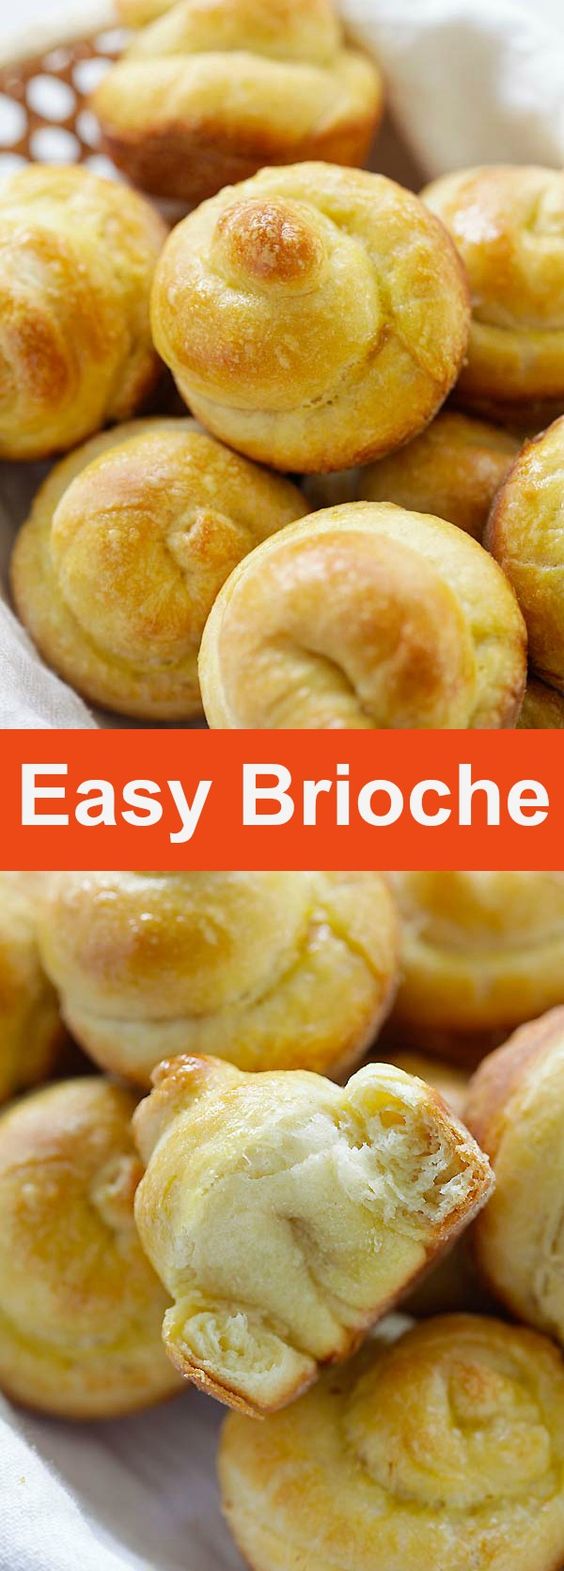 Easy Brioche - the easiest homemade French Brioche recipe ever! It's eggy, buttery, puffy and flaky with a crispy crumbs that you can't stop eating | rasamalaysia.com